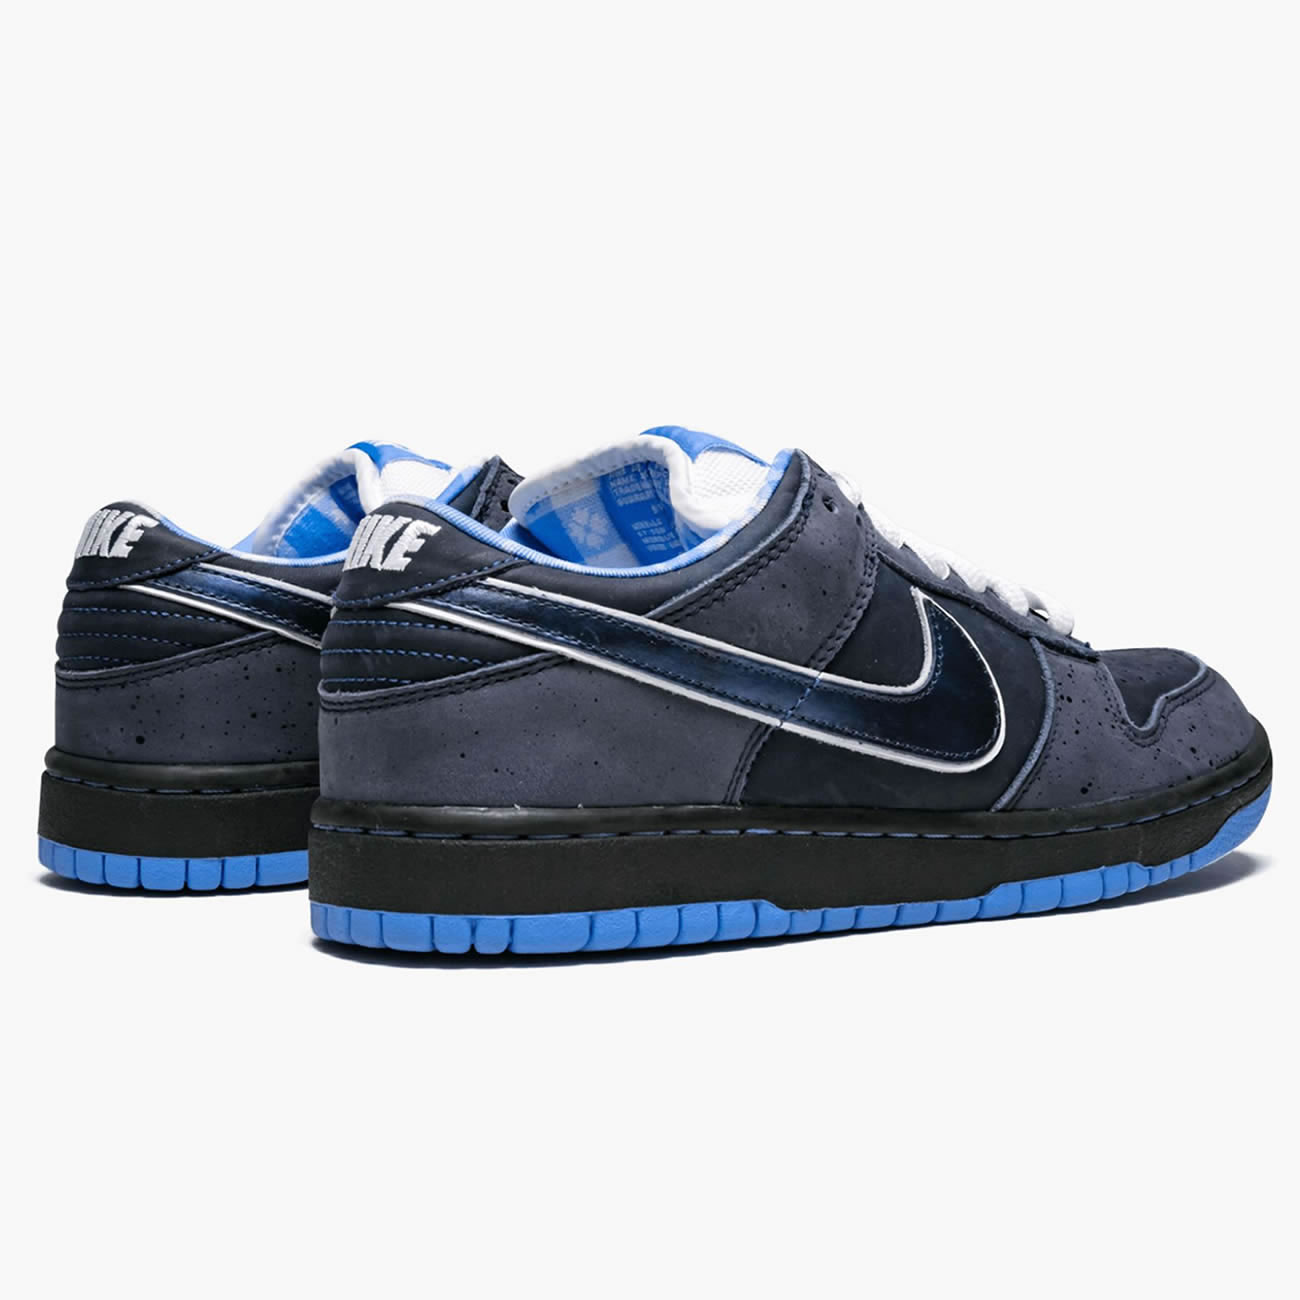 Nike Sb Dunk Low Concepts Bluelobster 313170 342 (3) - newkick.org